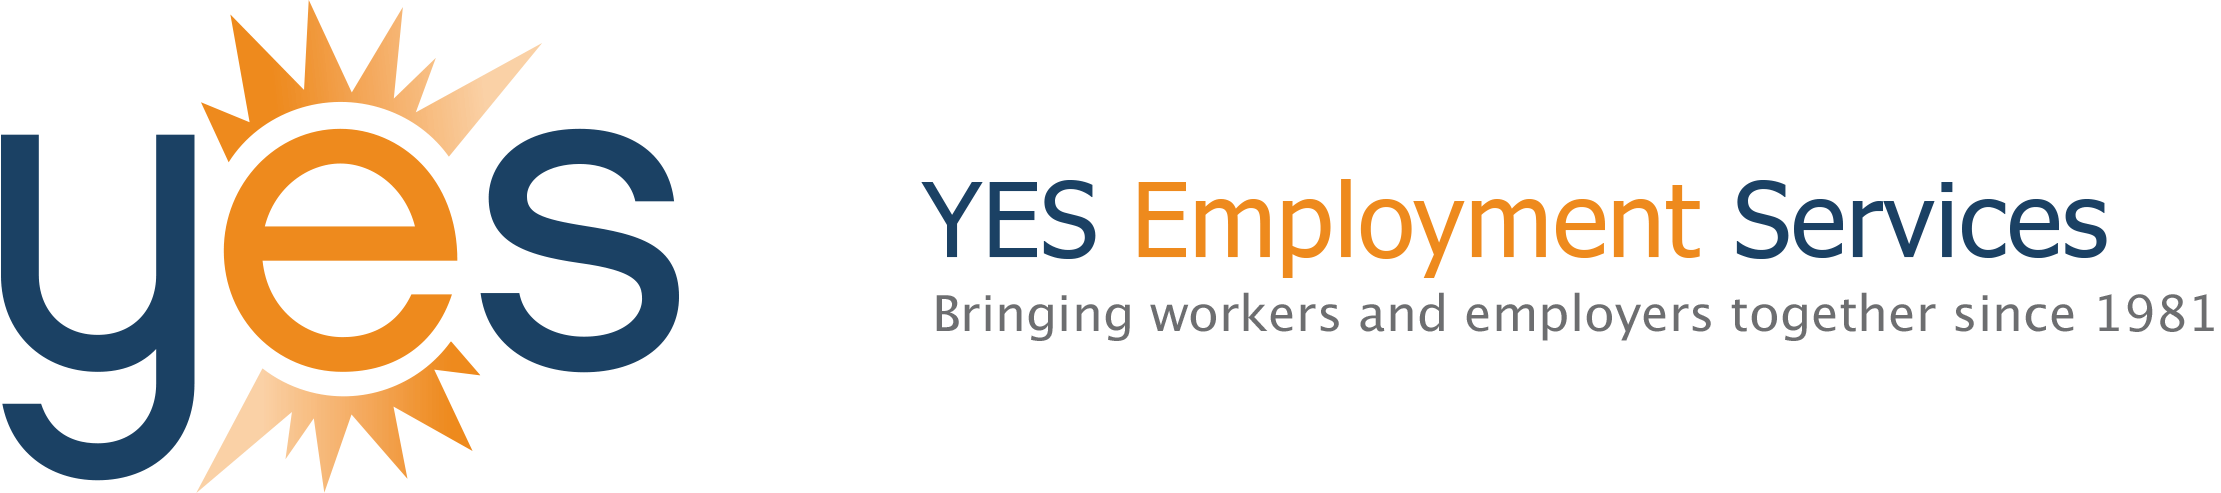 Employment Service Logo - YES Employment Services :: Bringing workers and employers together ...